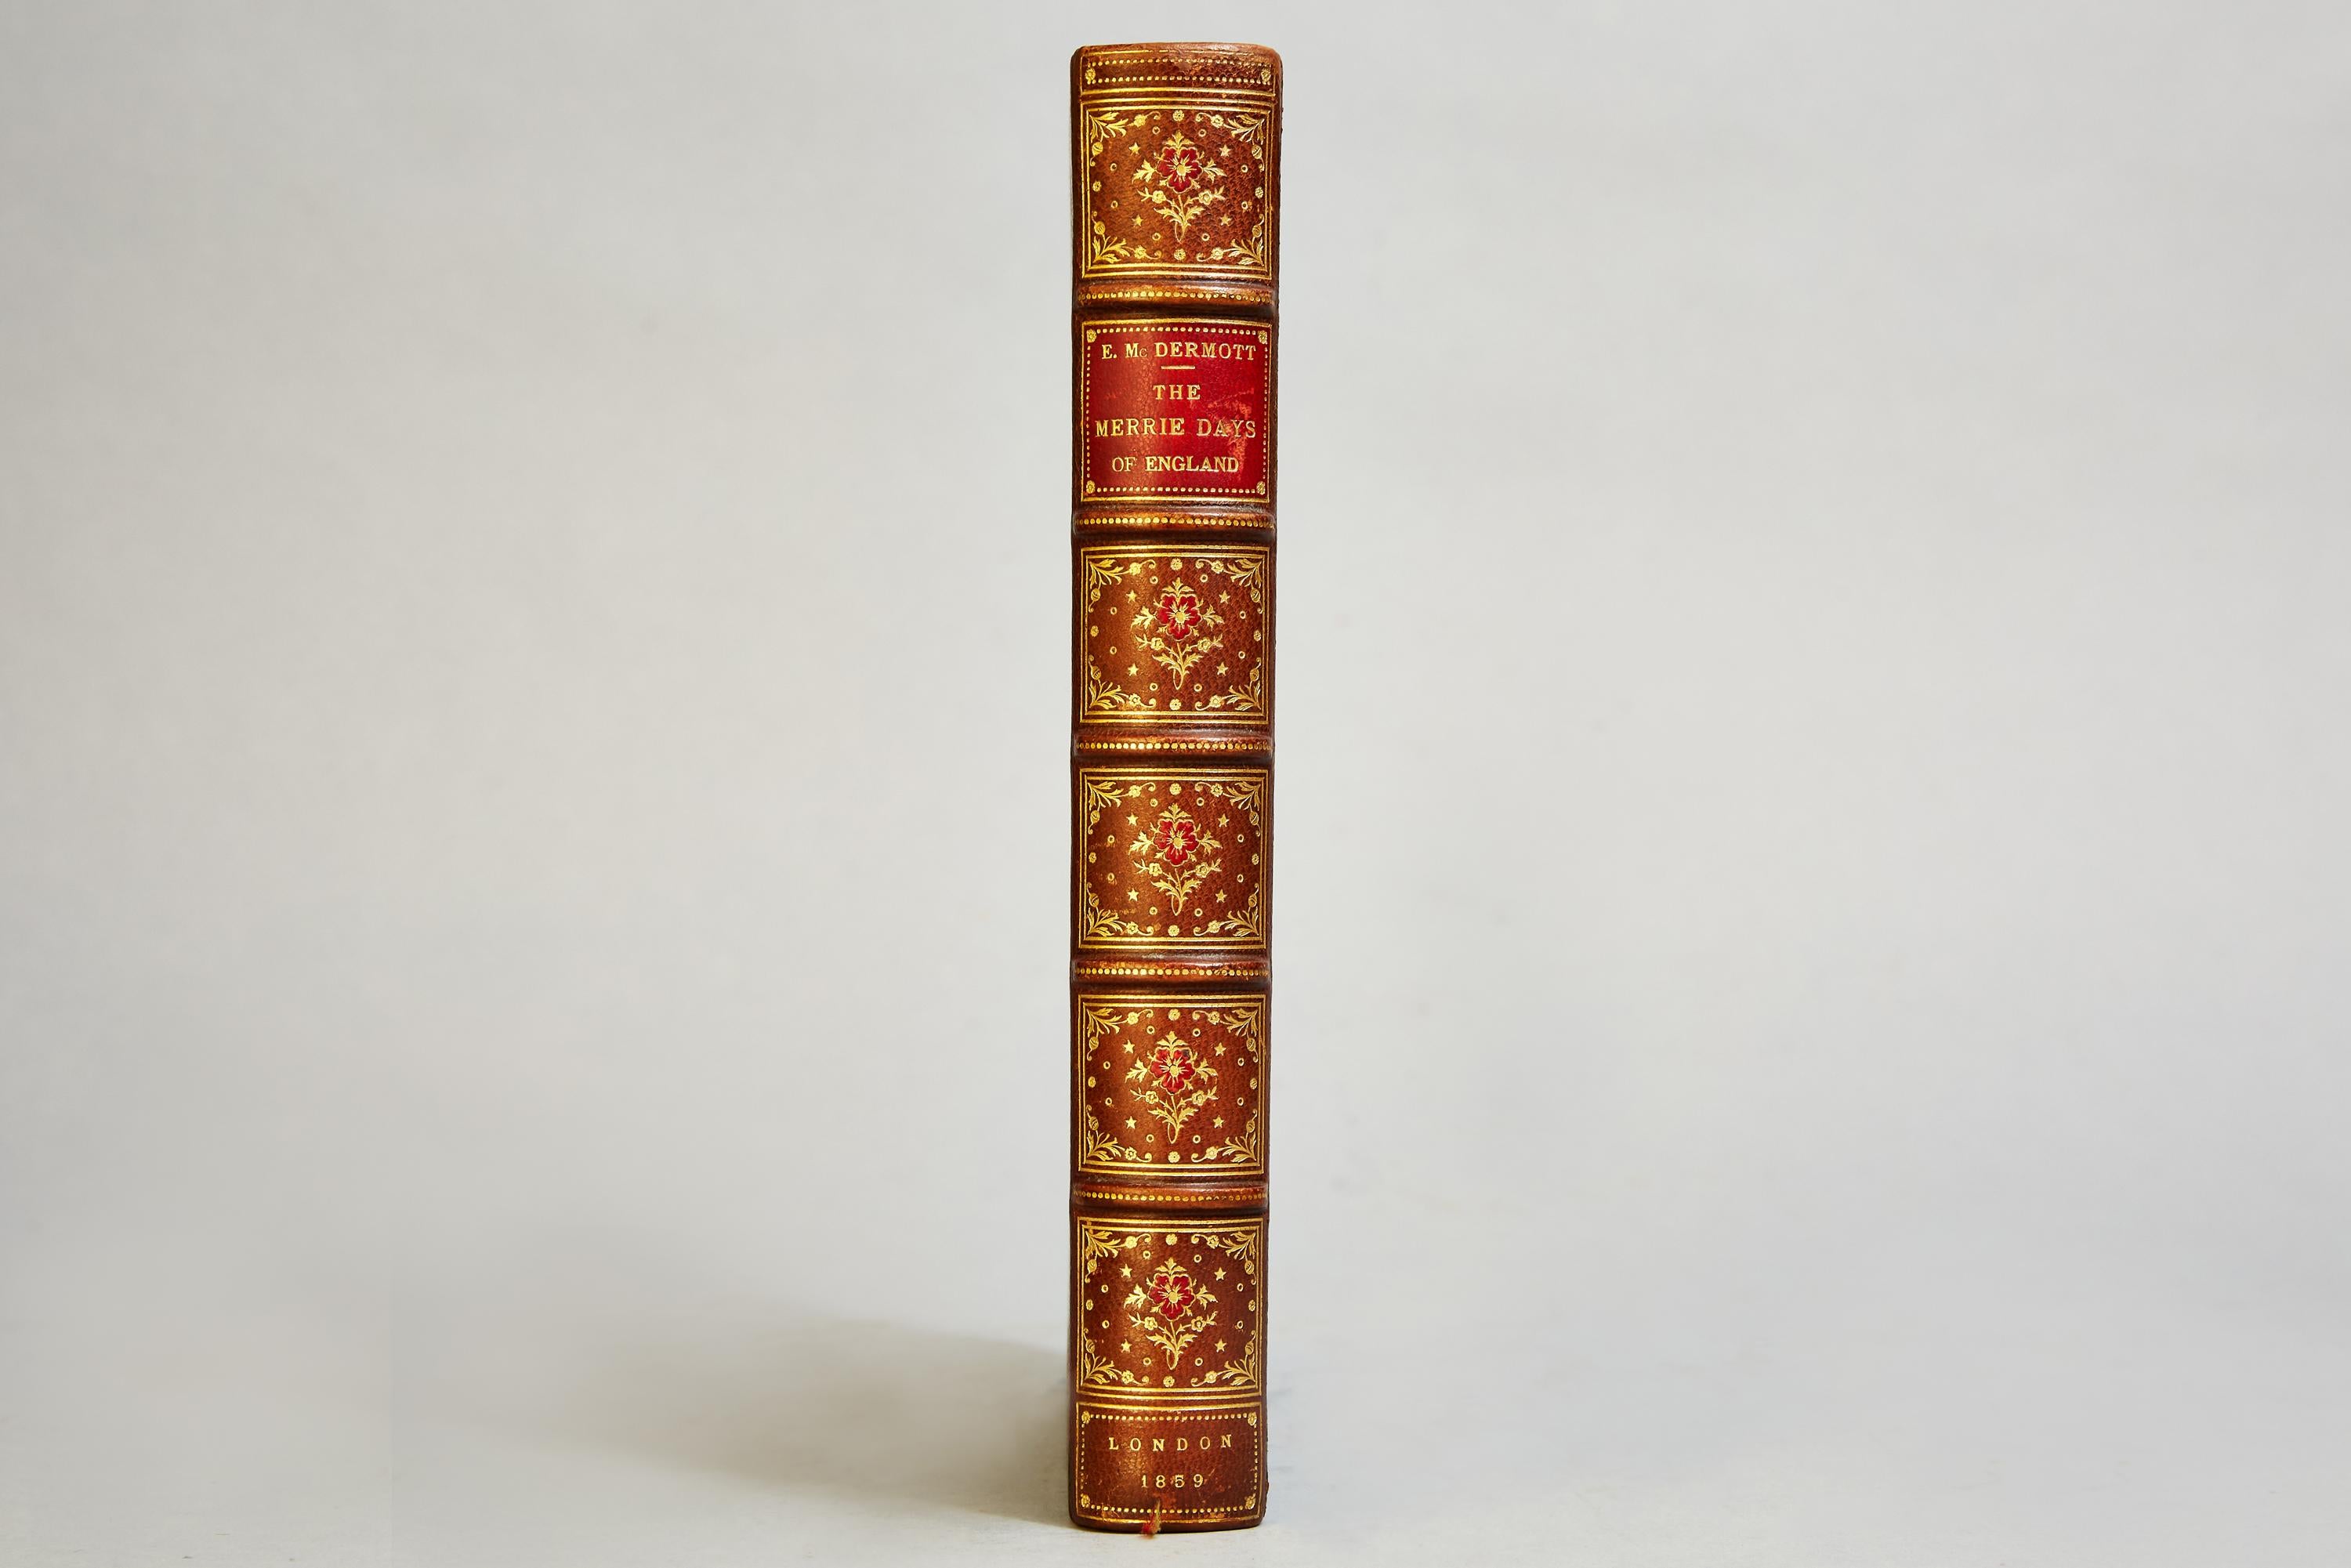 Sketches of the Olden. Illustrated with 20 Engravings from Drawings by Joseph Nash, George Thomas, Birket Foster, and Edward Corbould.

First Edition

One volume. Quarto. Bound in full green morocco leather by Ritter with top edges gilt, raised